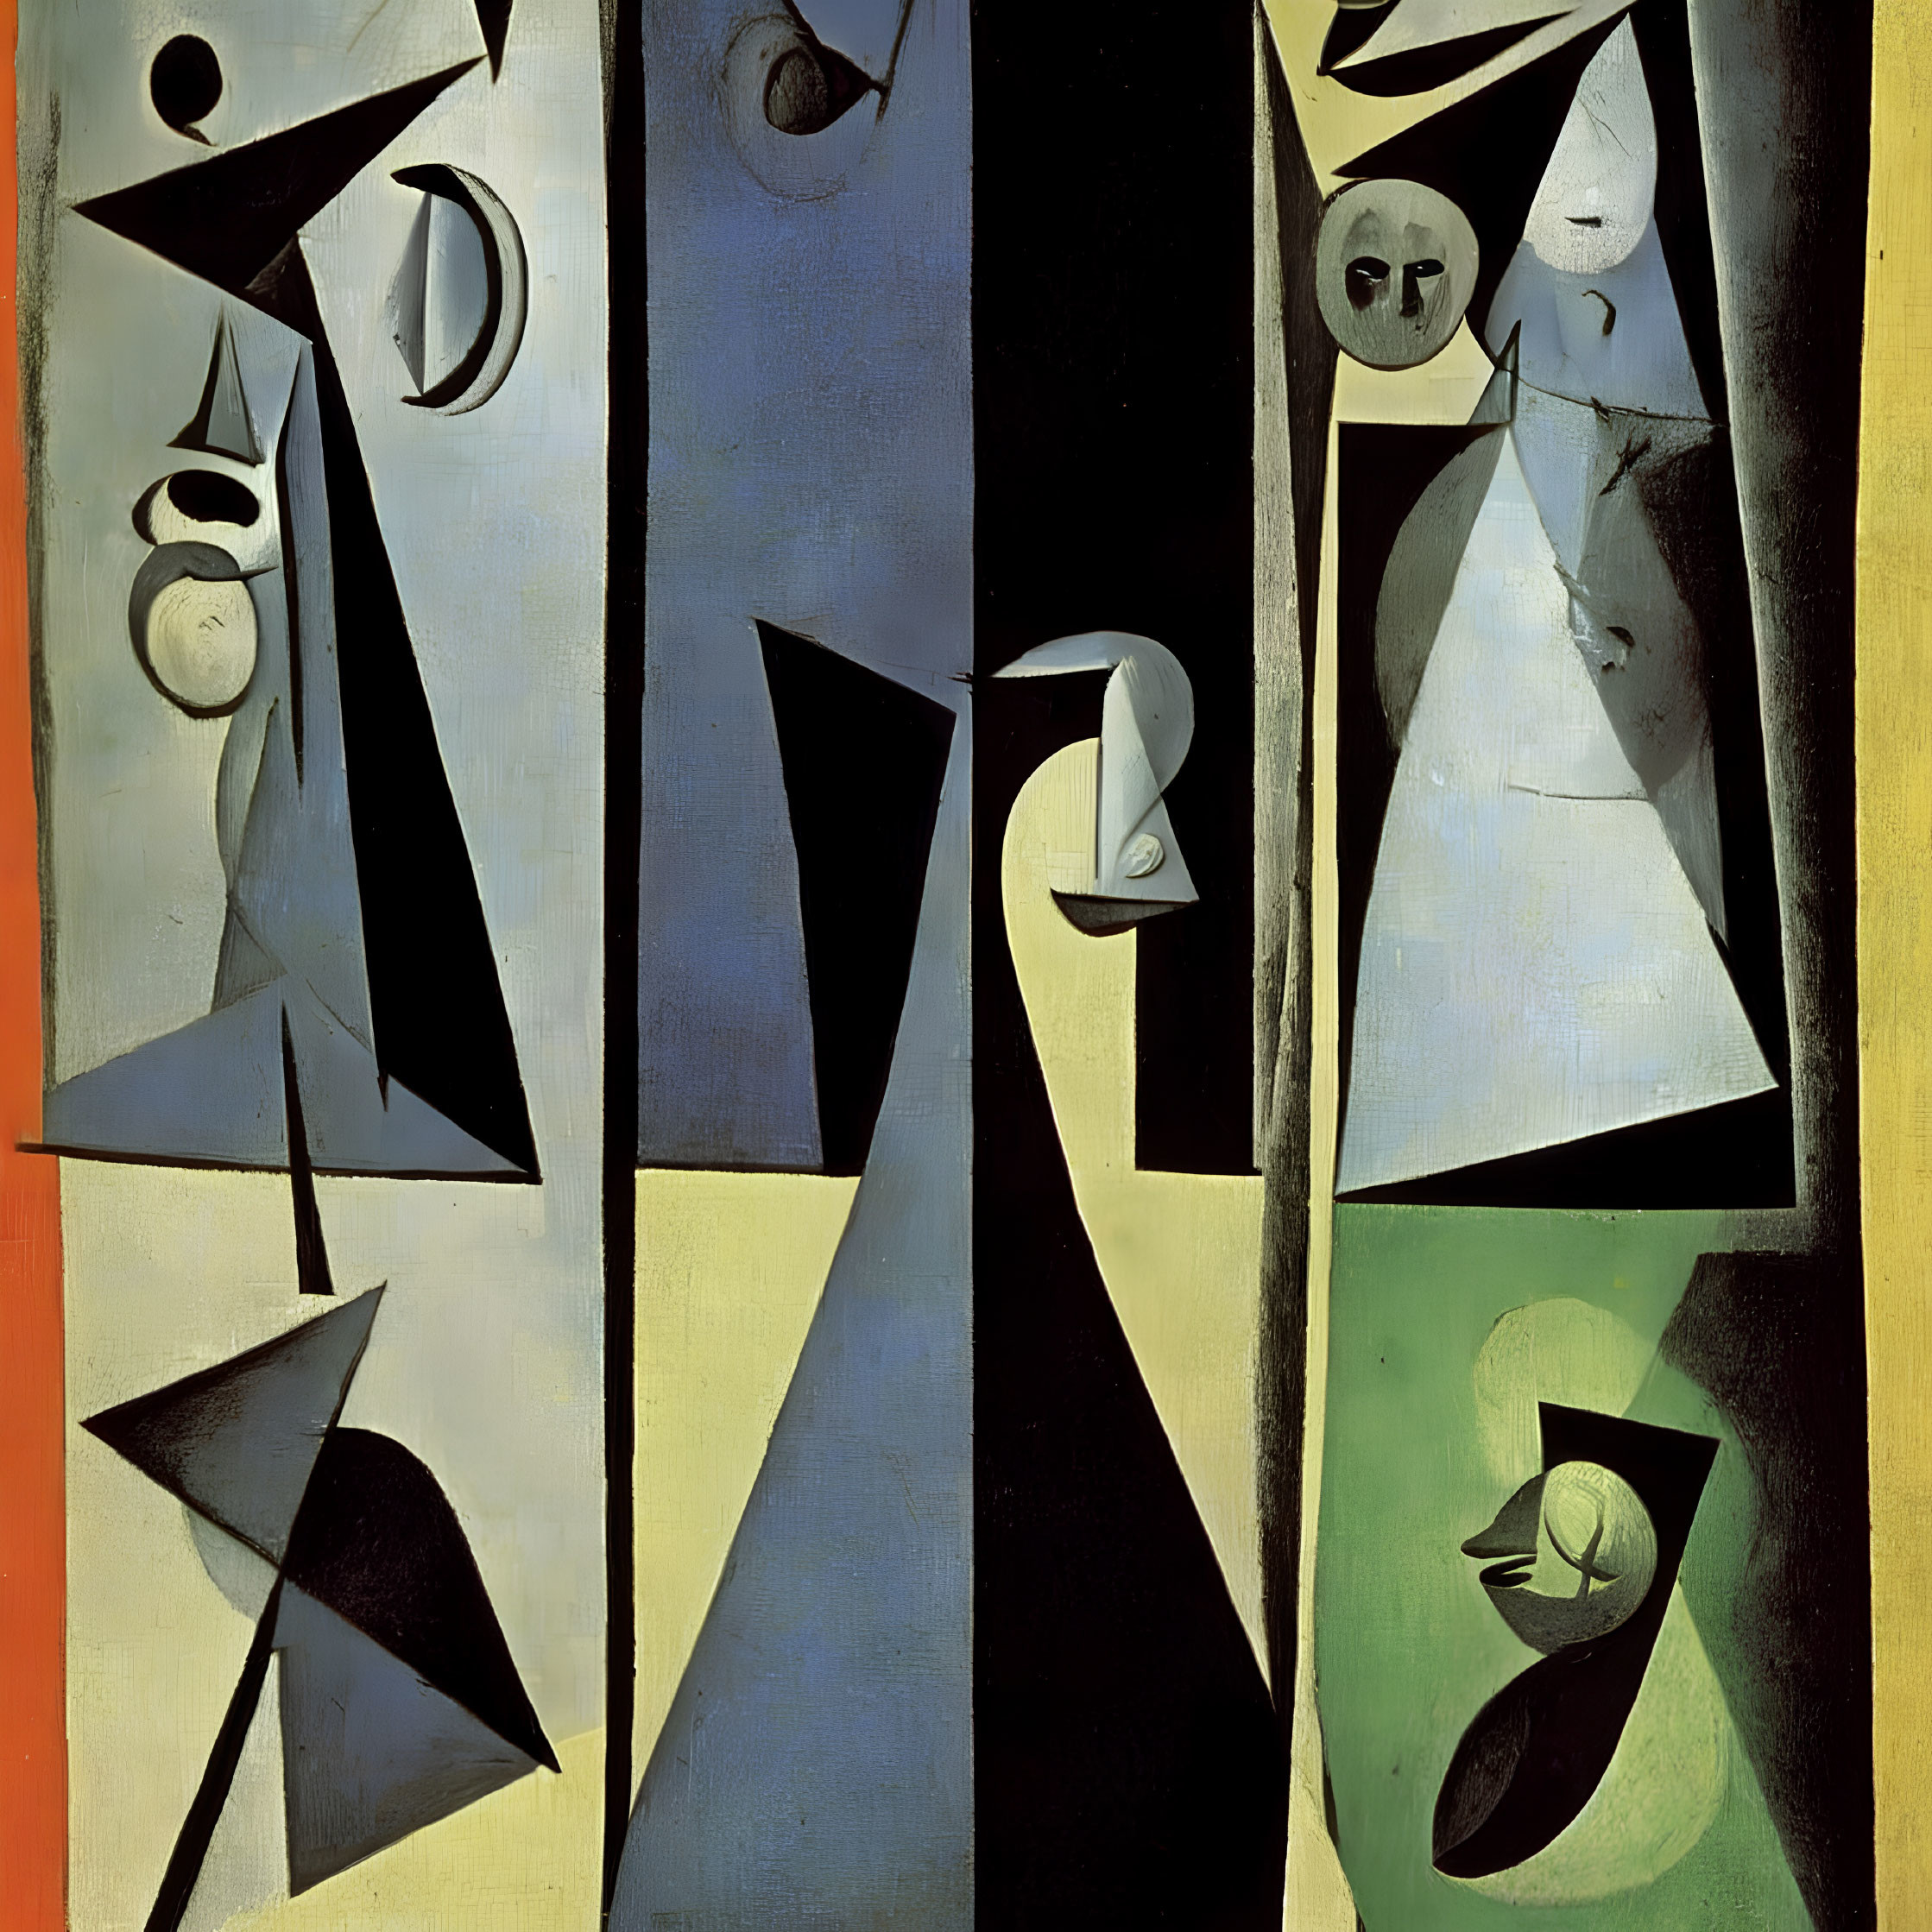 Geometric Cubist Painting in Yellow, Blue, Black, White, and Green